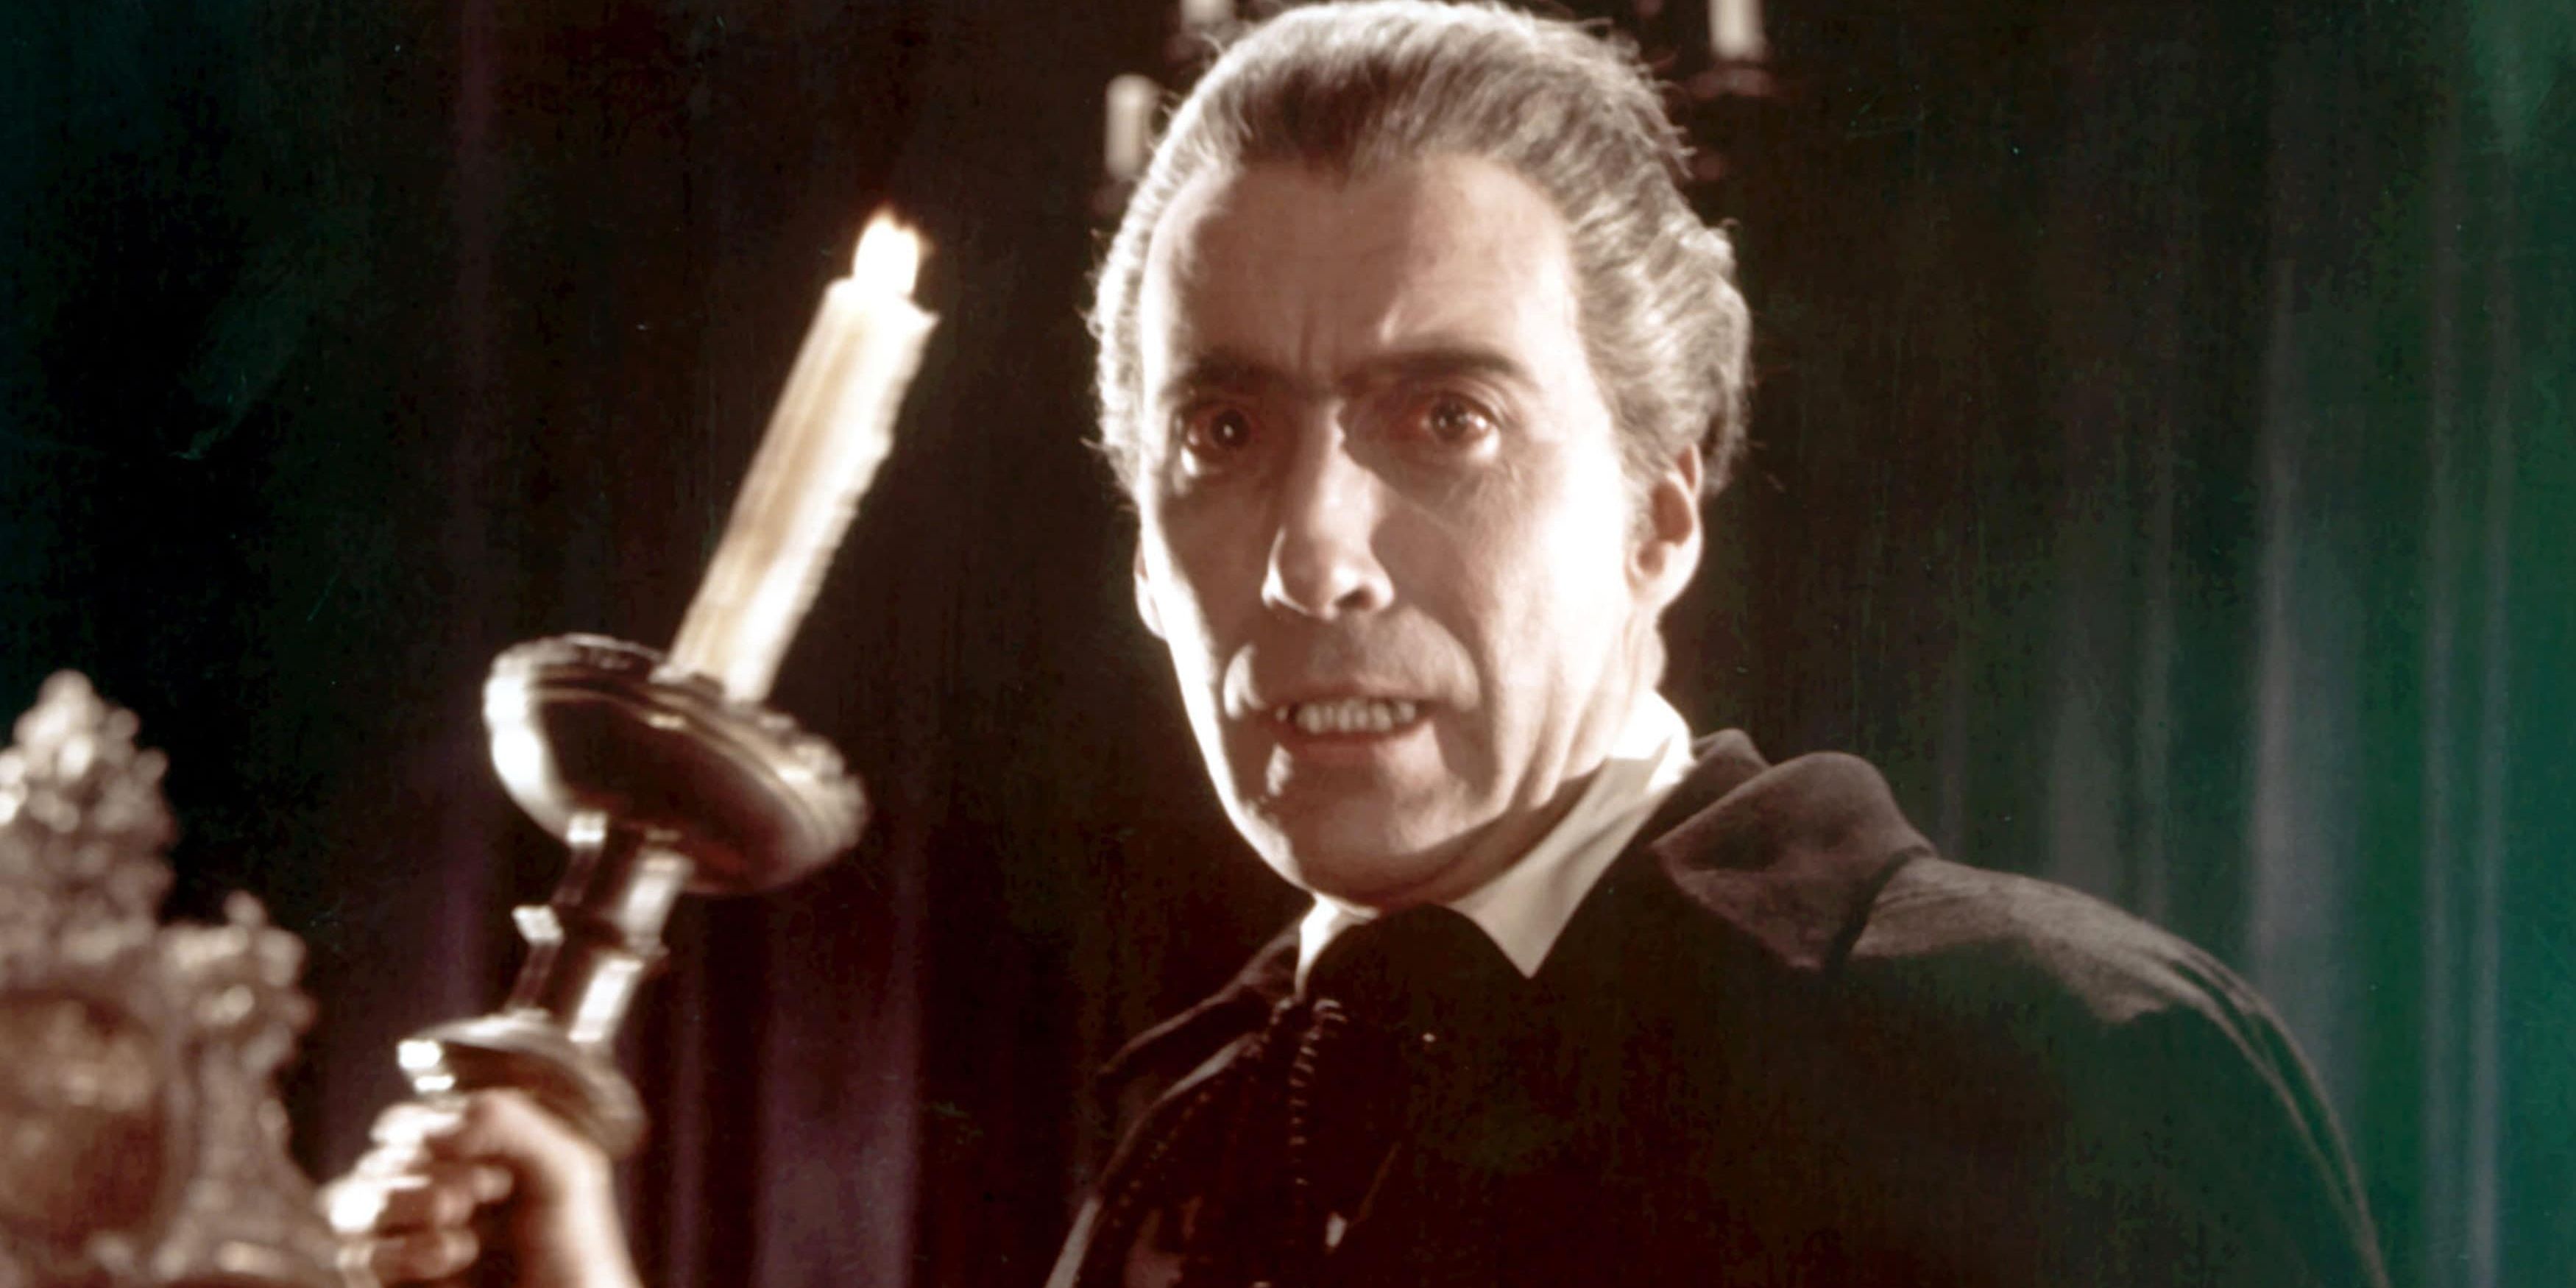 Christopher Lee as Dracula in Dracula Dracula holding a candlestick (Hammer Horror Series)